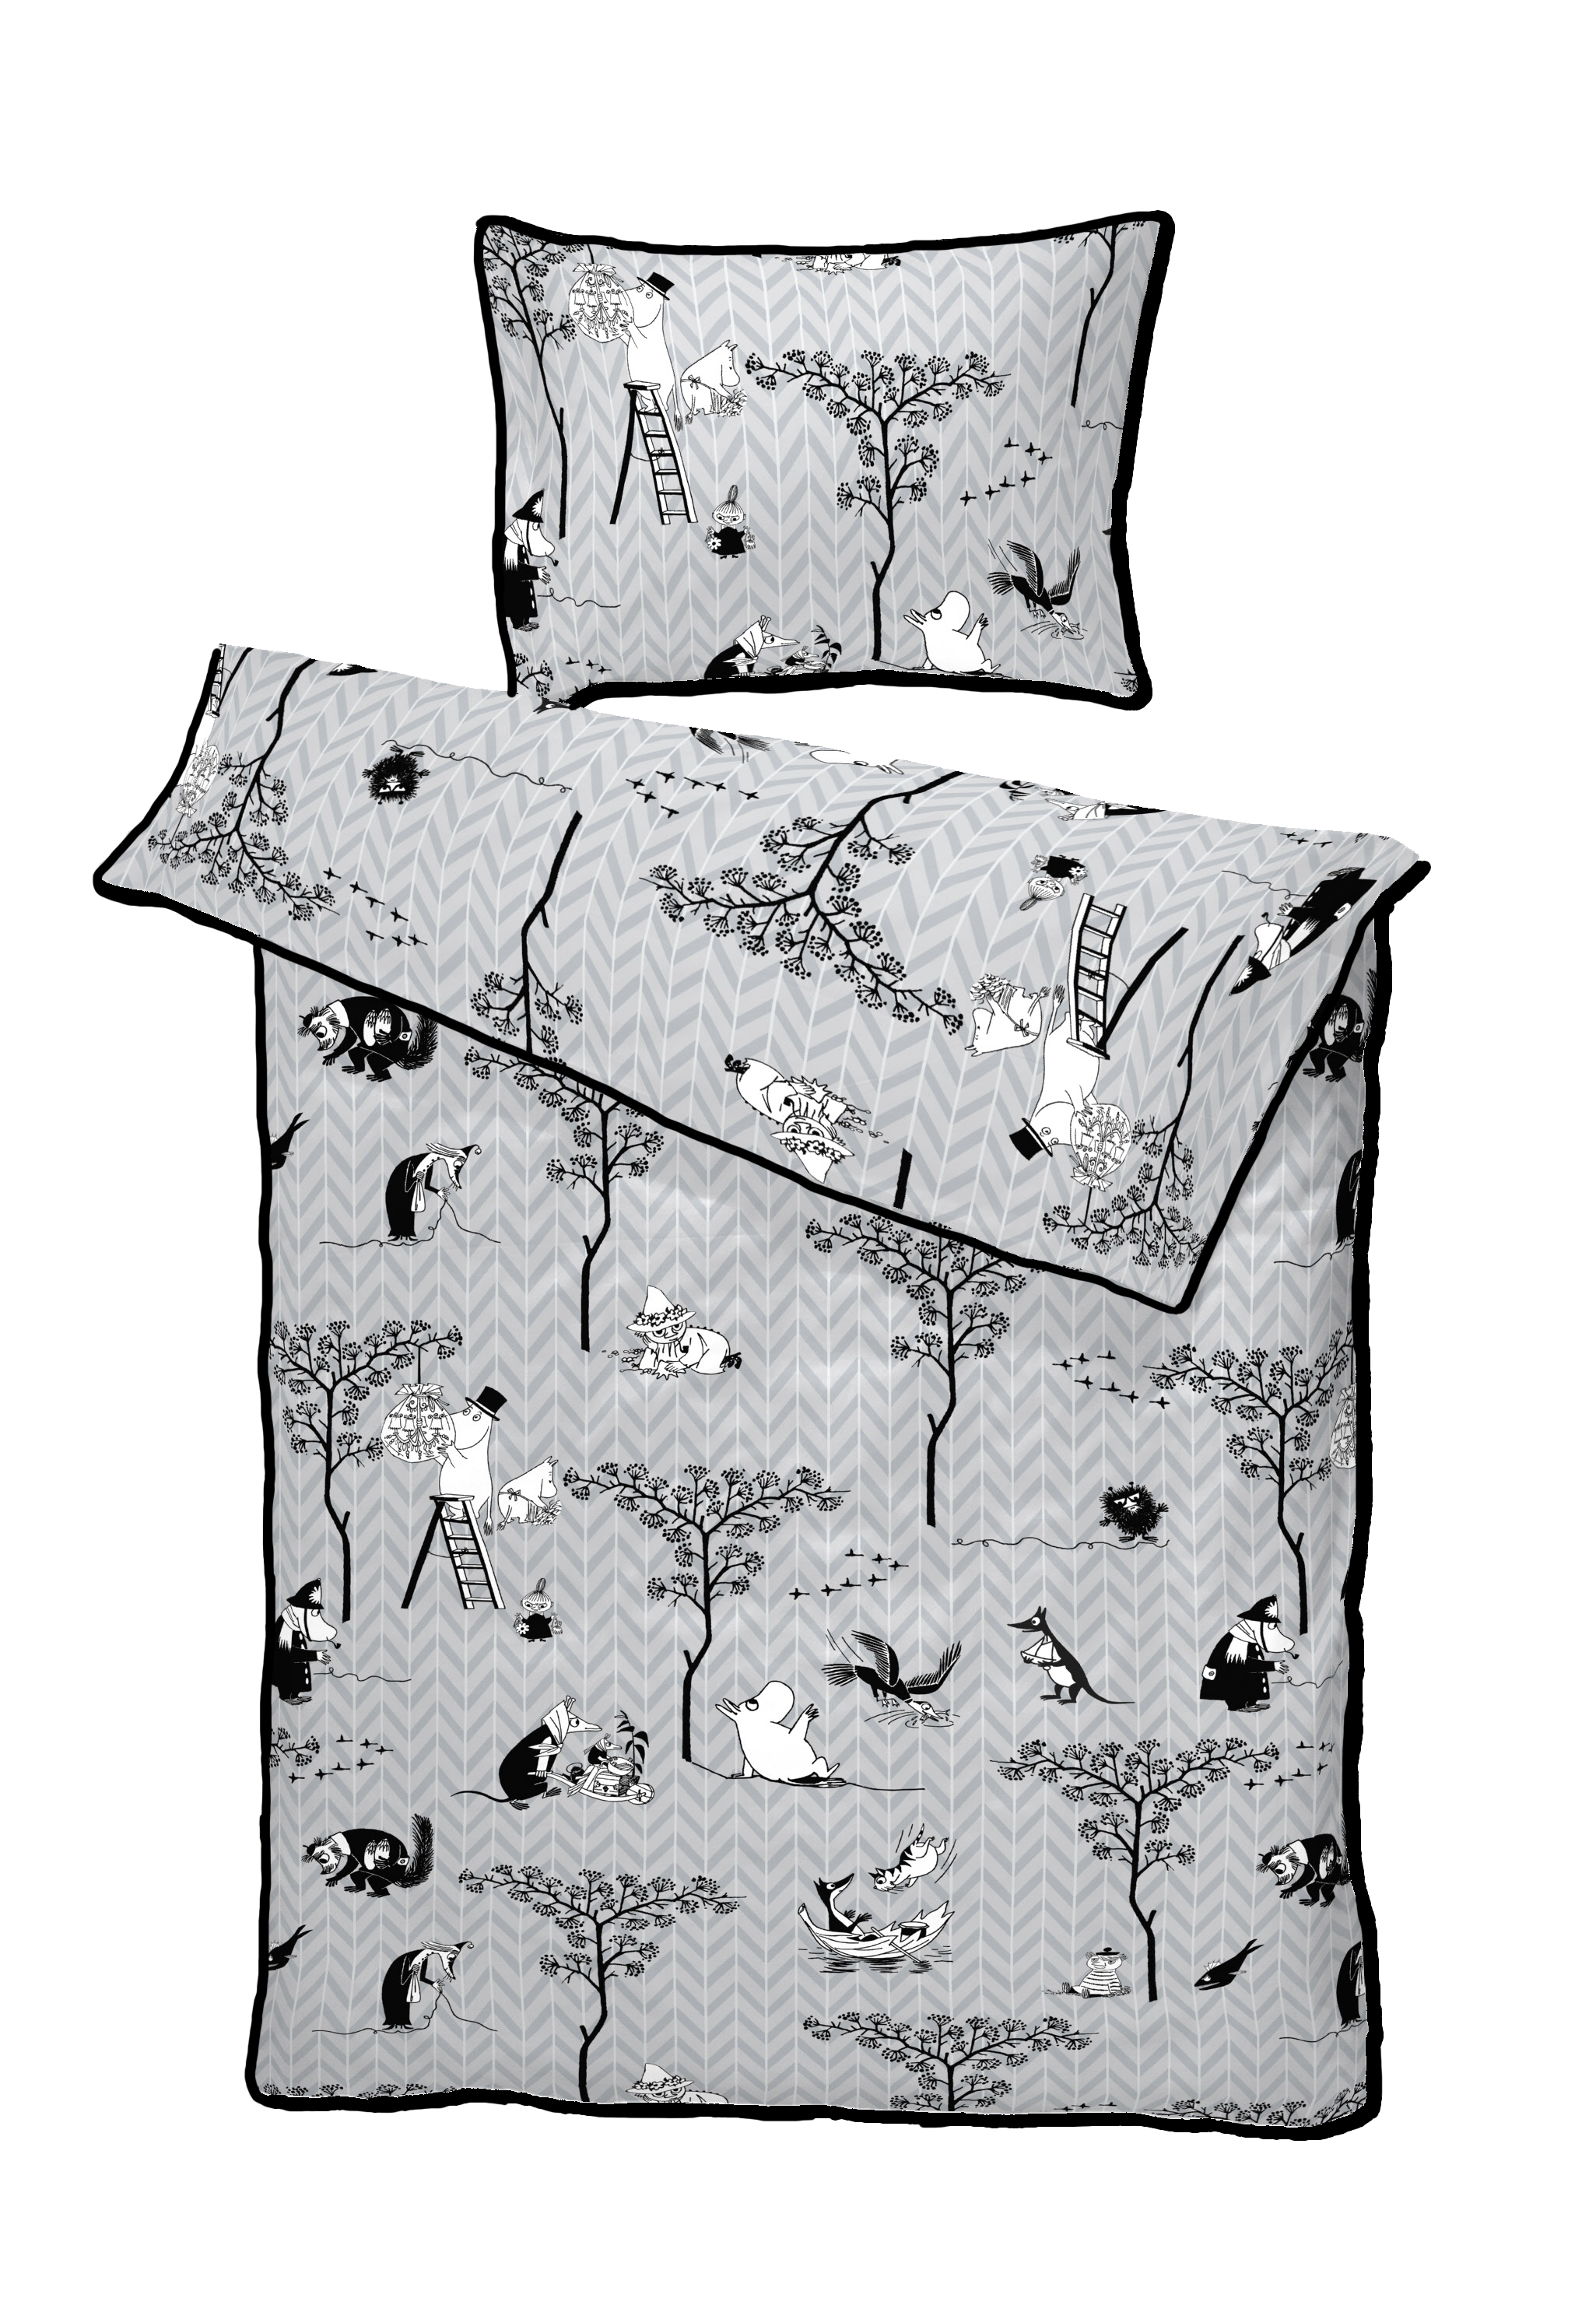 Turiform Moomin Treasure hunt bed set (not available in Finland)